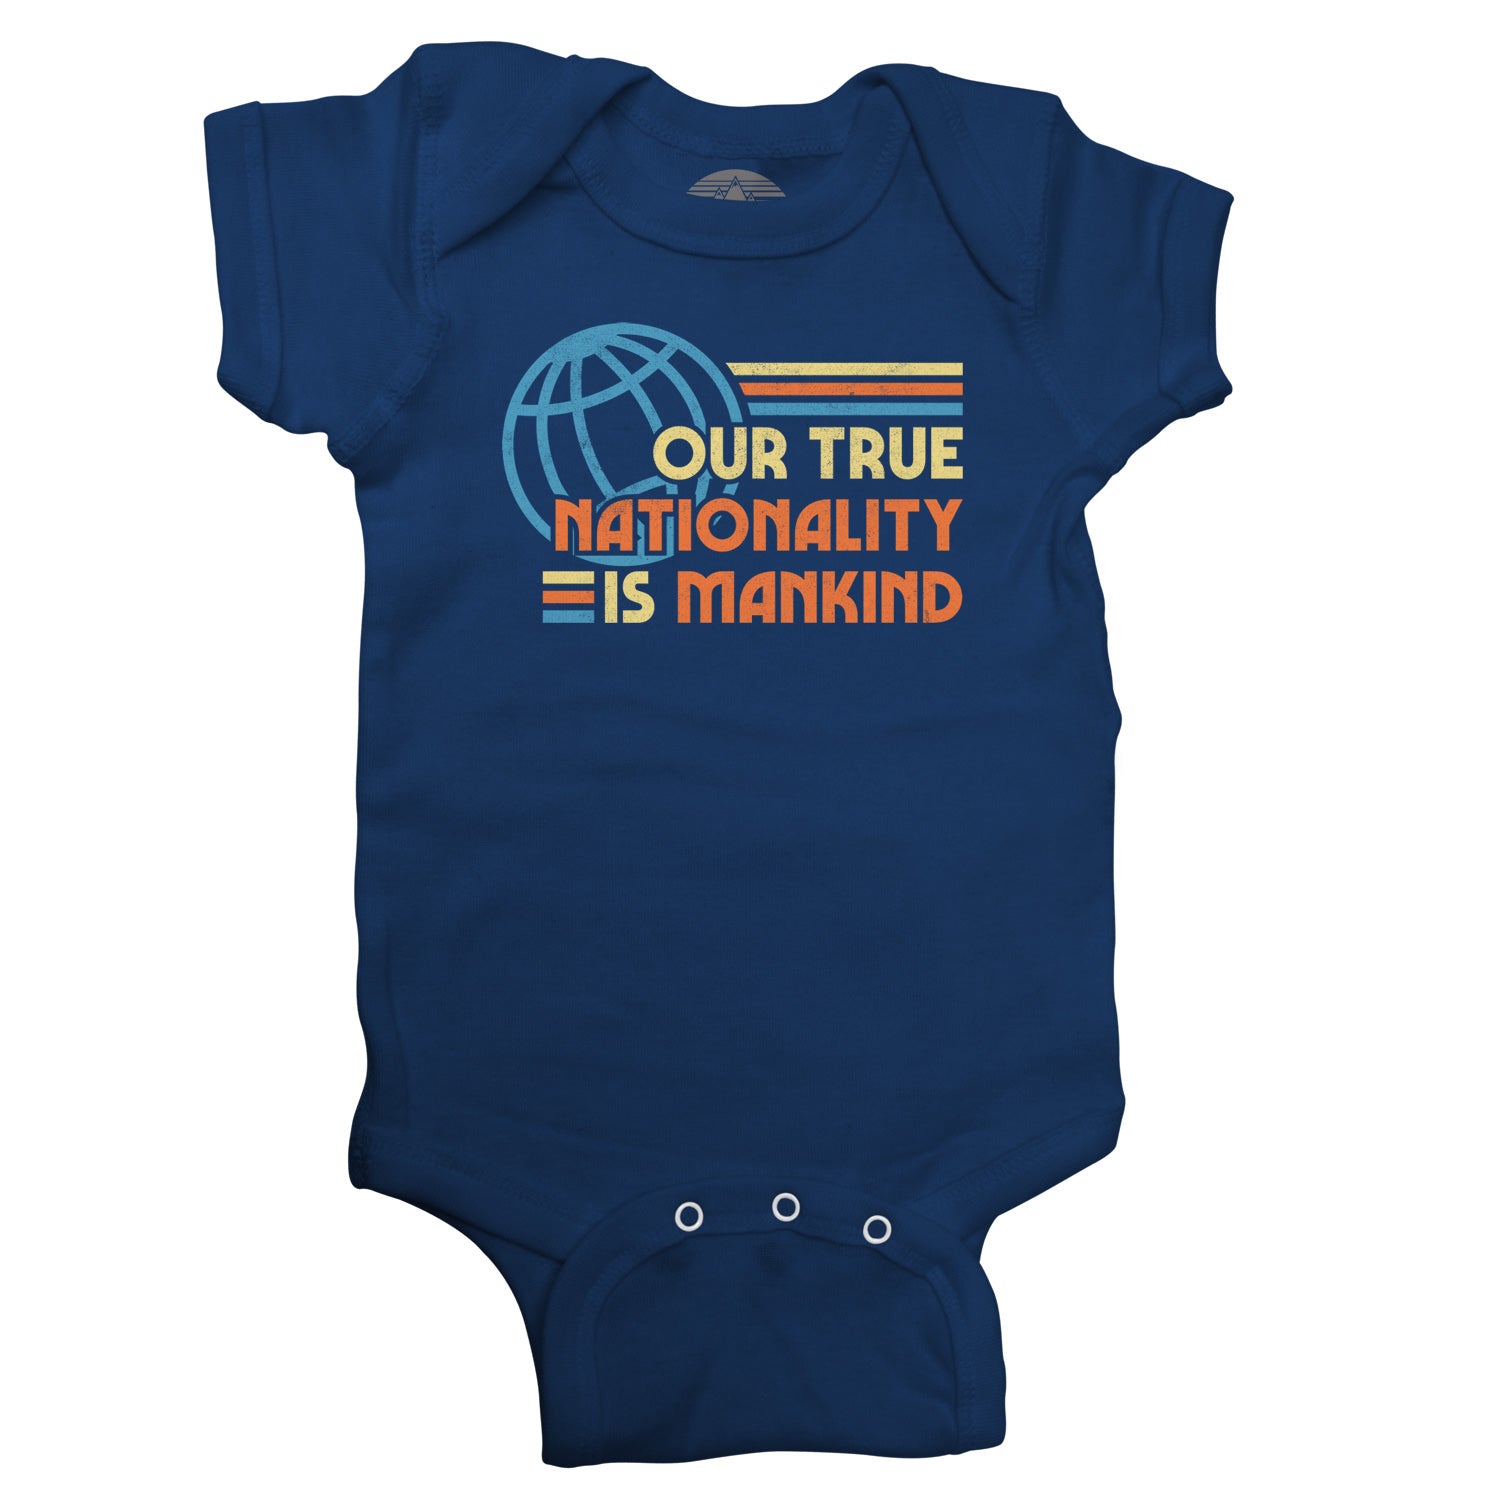 Our True Nationality is Mankind Infant Bodysuit - Unisex Fit